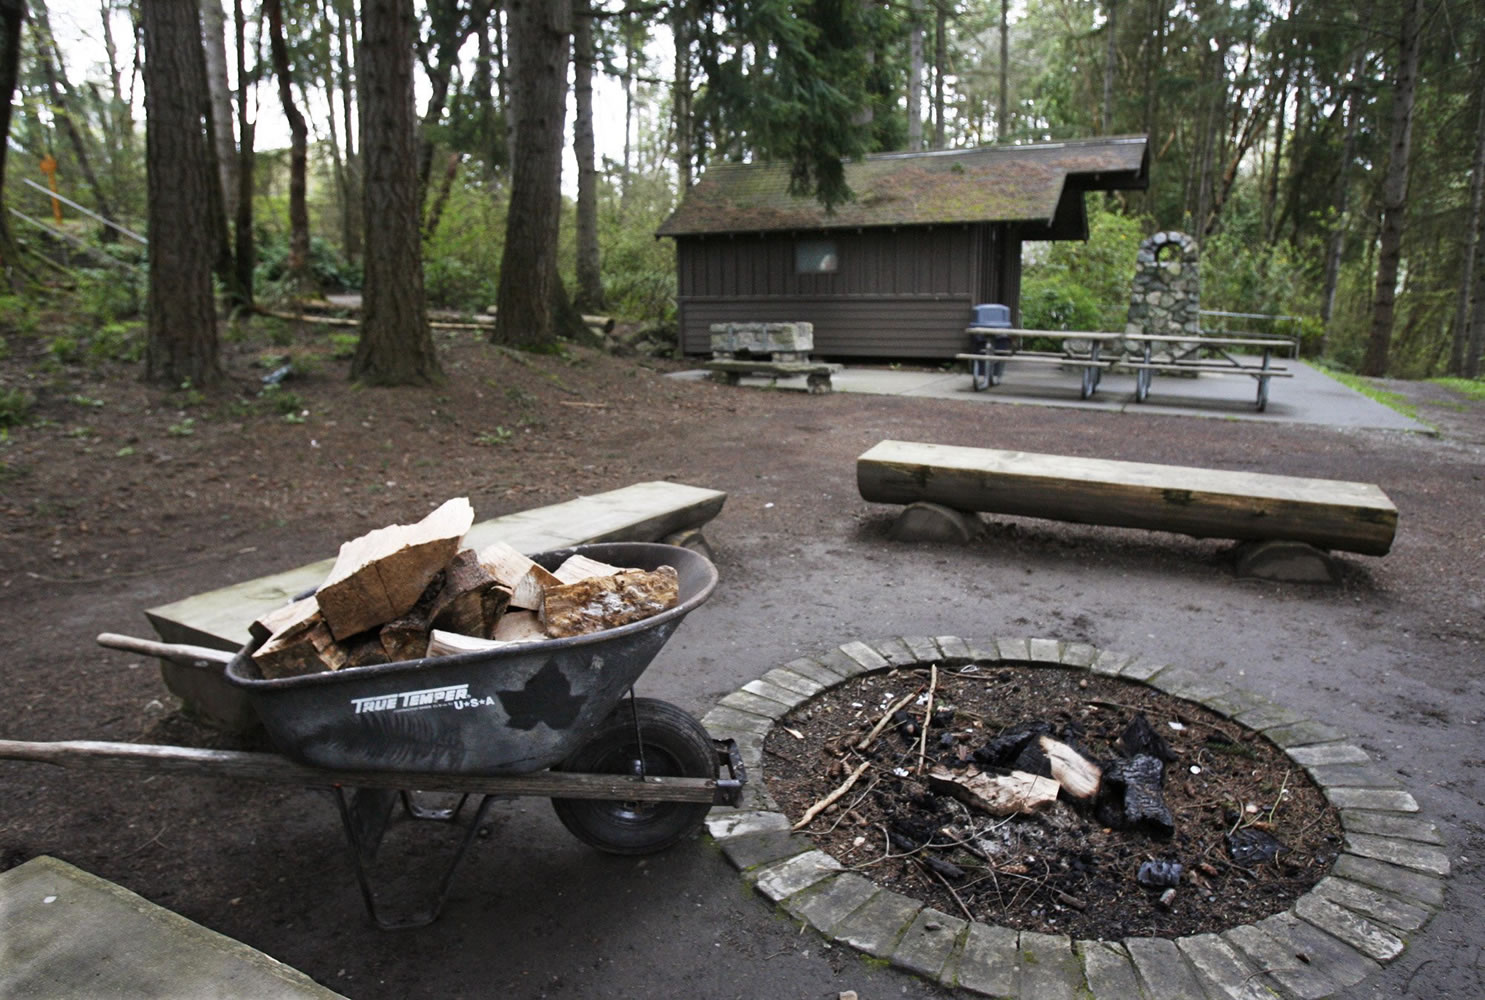 Photos by Alan Berner/The Seattle Times
West Seattle's Camp Long not only has pleasant walks but rustic rental cabins that feel far from the bustle of the city. It feels like you're deep in a forest when in reality you're a five-minute walk away from homes and street traffic.